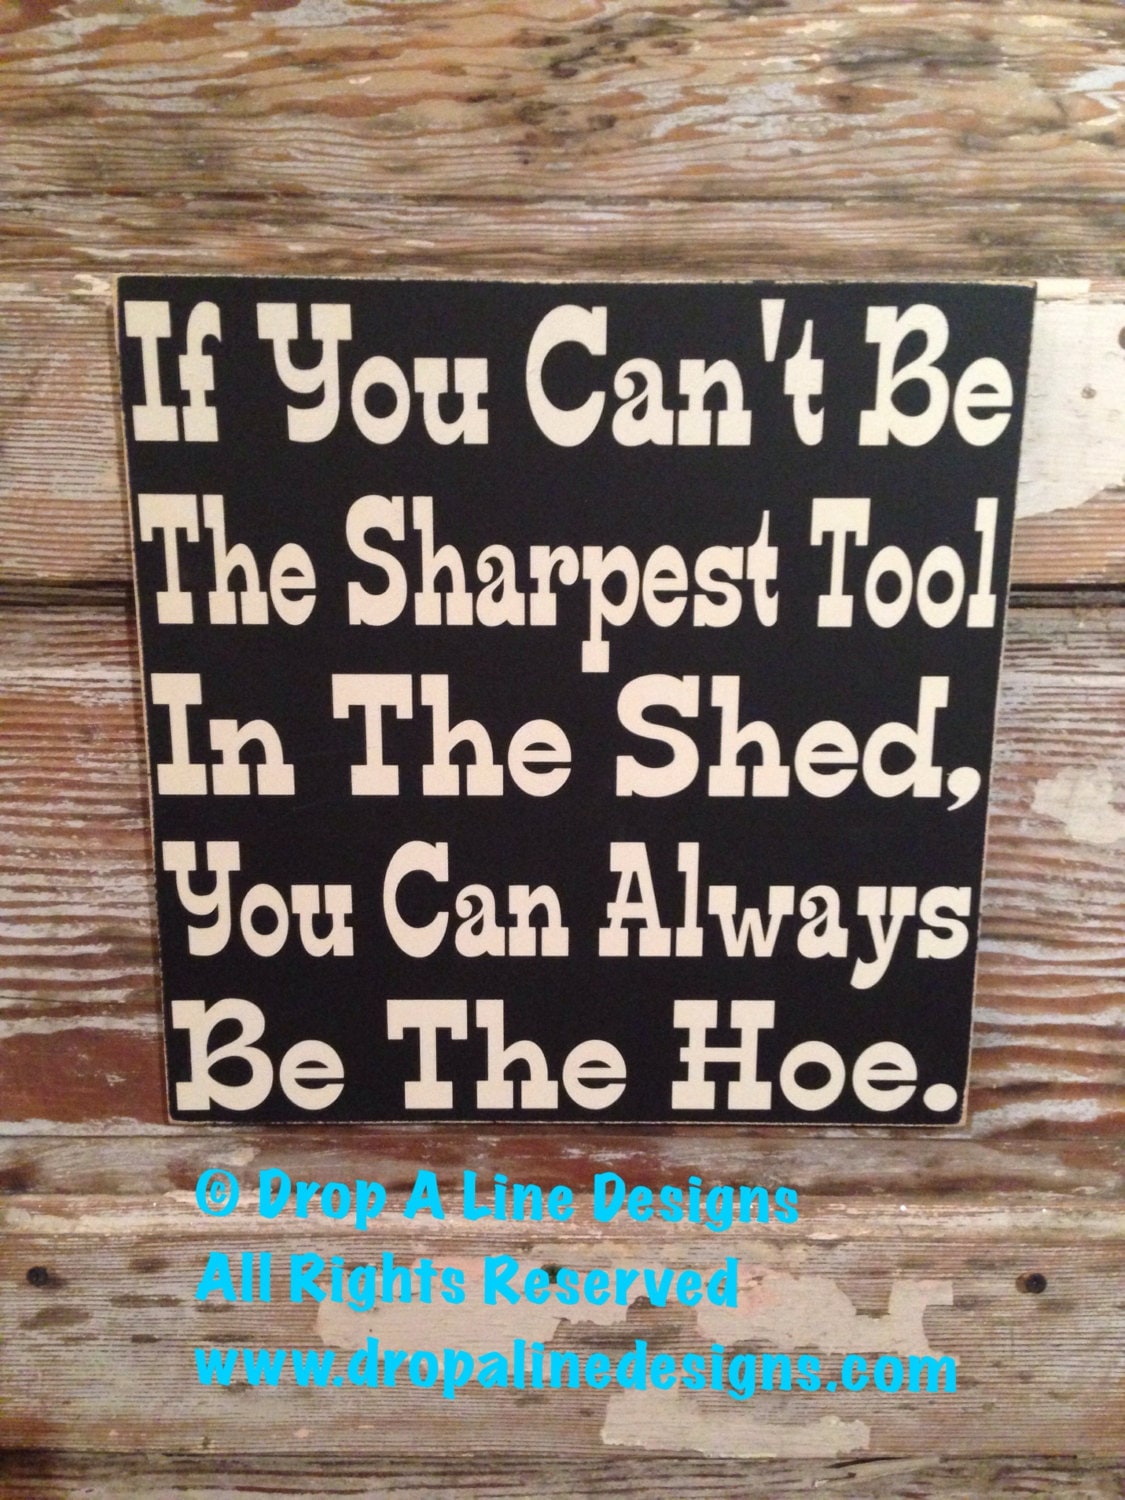 If You Can't Be The Sharpes   t Tool In The Shed You Can